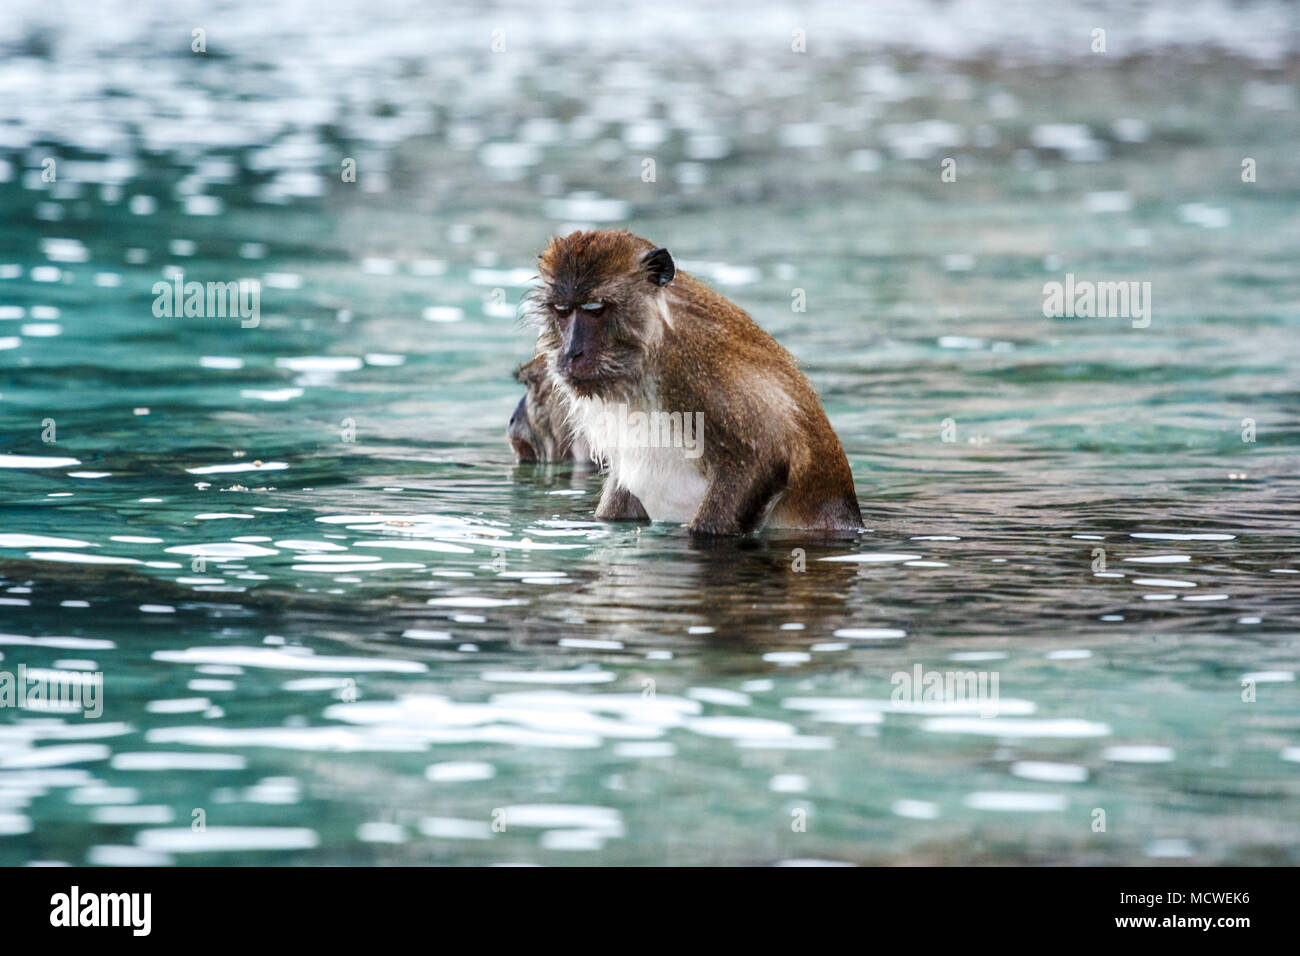 View of a macacus swimming for food from tourists in Monkey Beach, Phi Phi Island, Thailand. Stock Photo